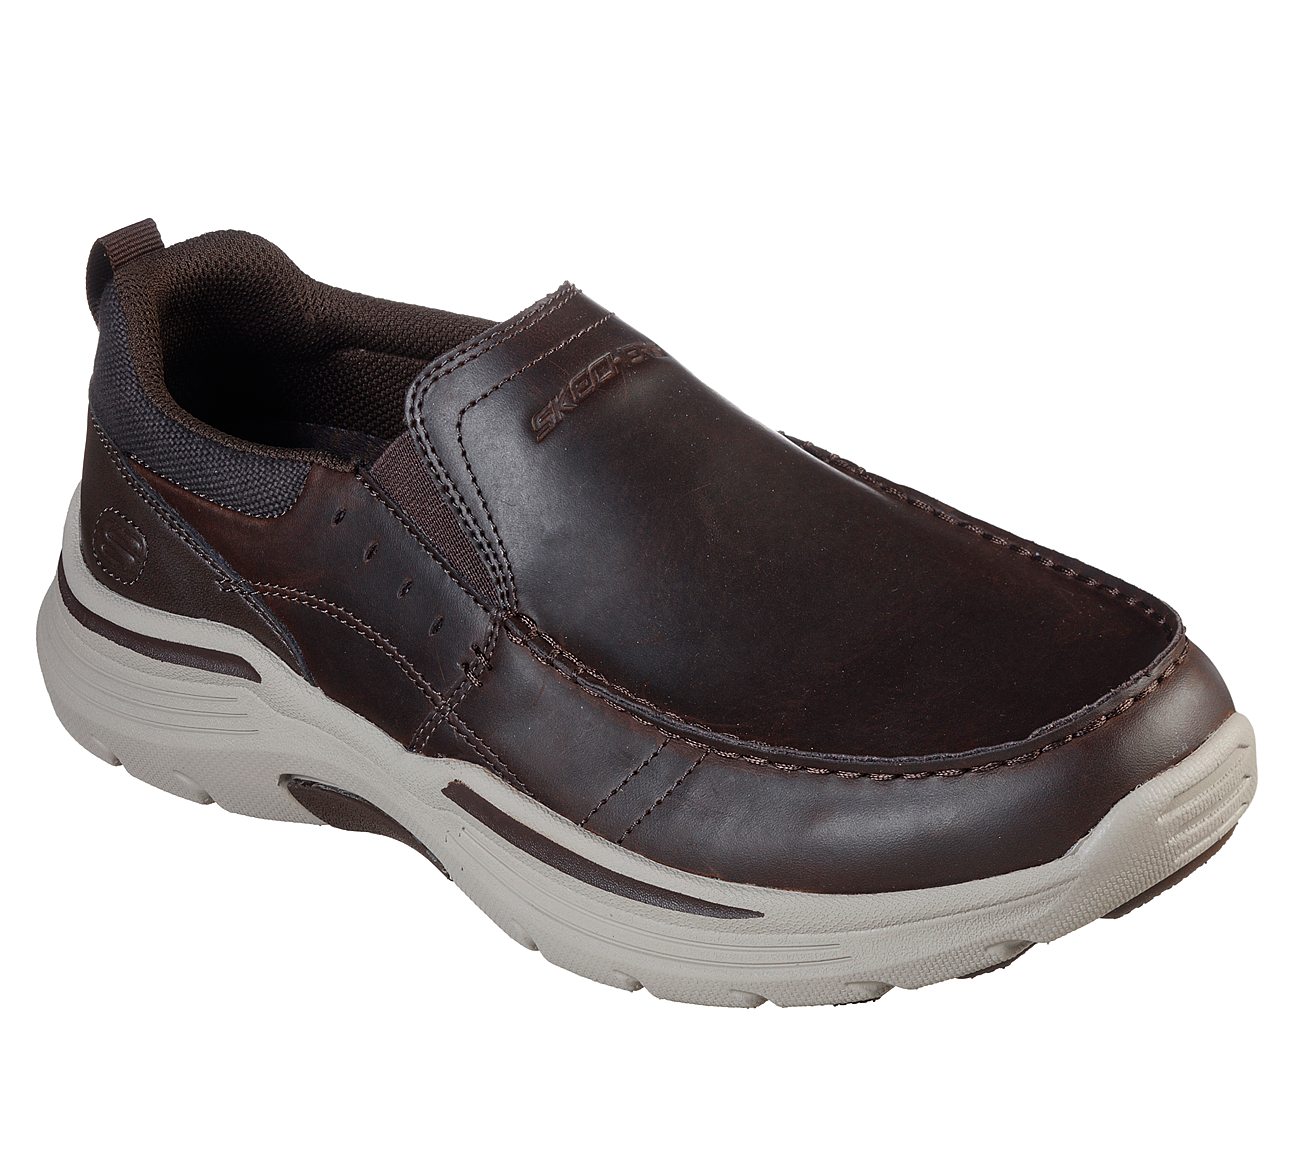 Buy SKECHERS Relaxed Fit: Expended - Seveno Comfort Shoes Shoes only $80.00